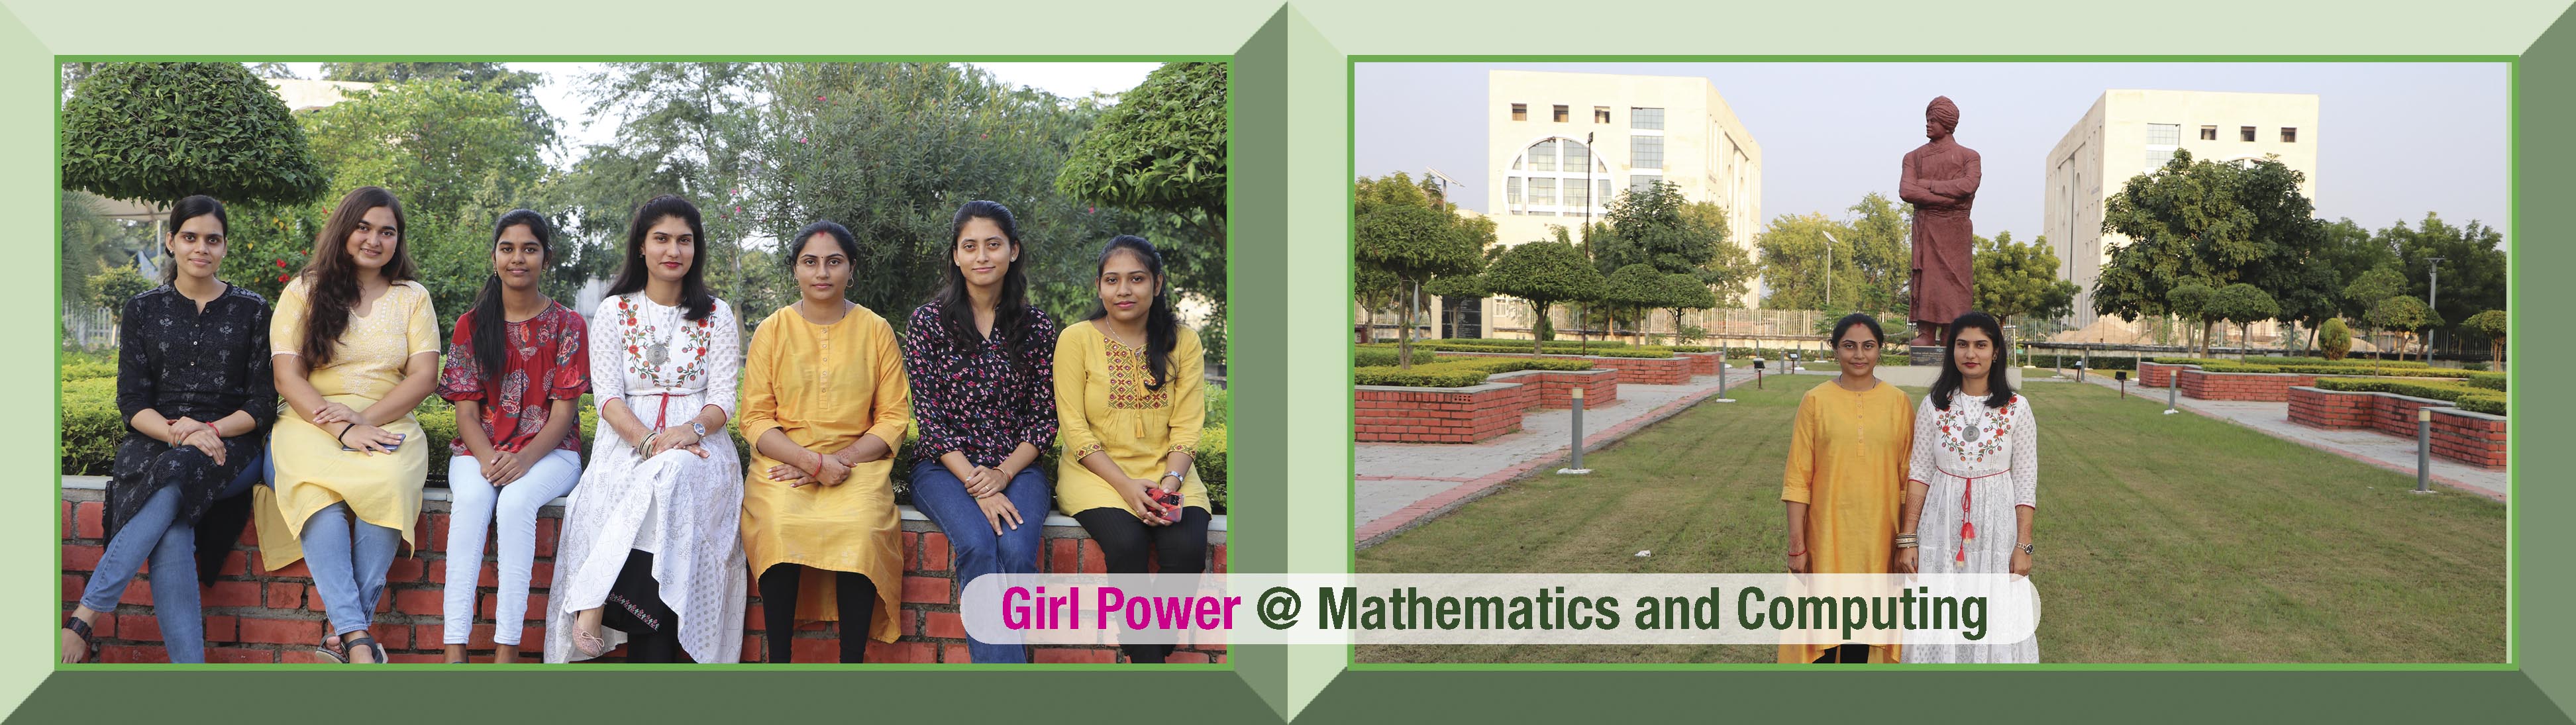 RGIPT is committed to strengthening girls’ beliefs about their abilities in Mathematical and Computing Sciences